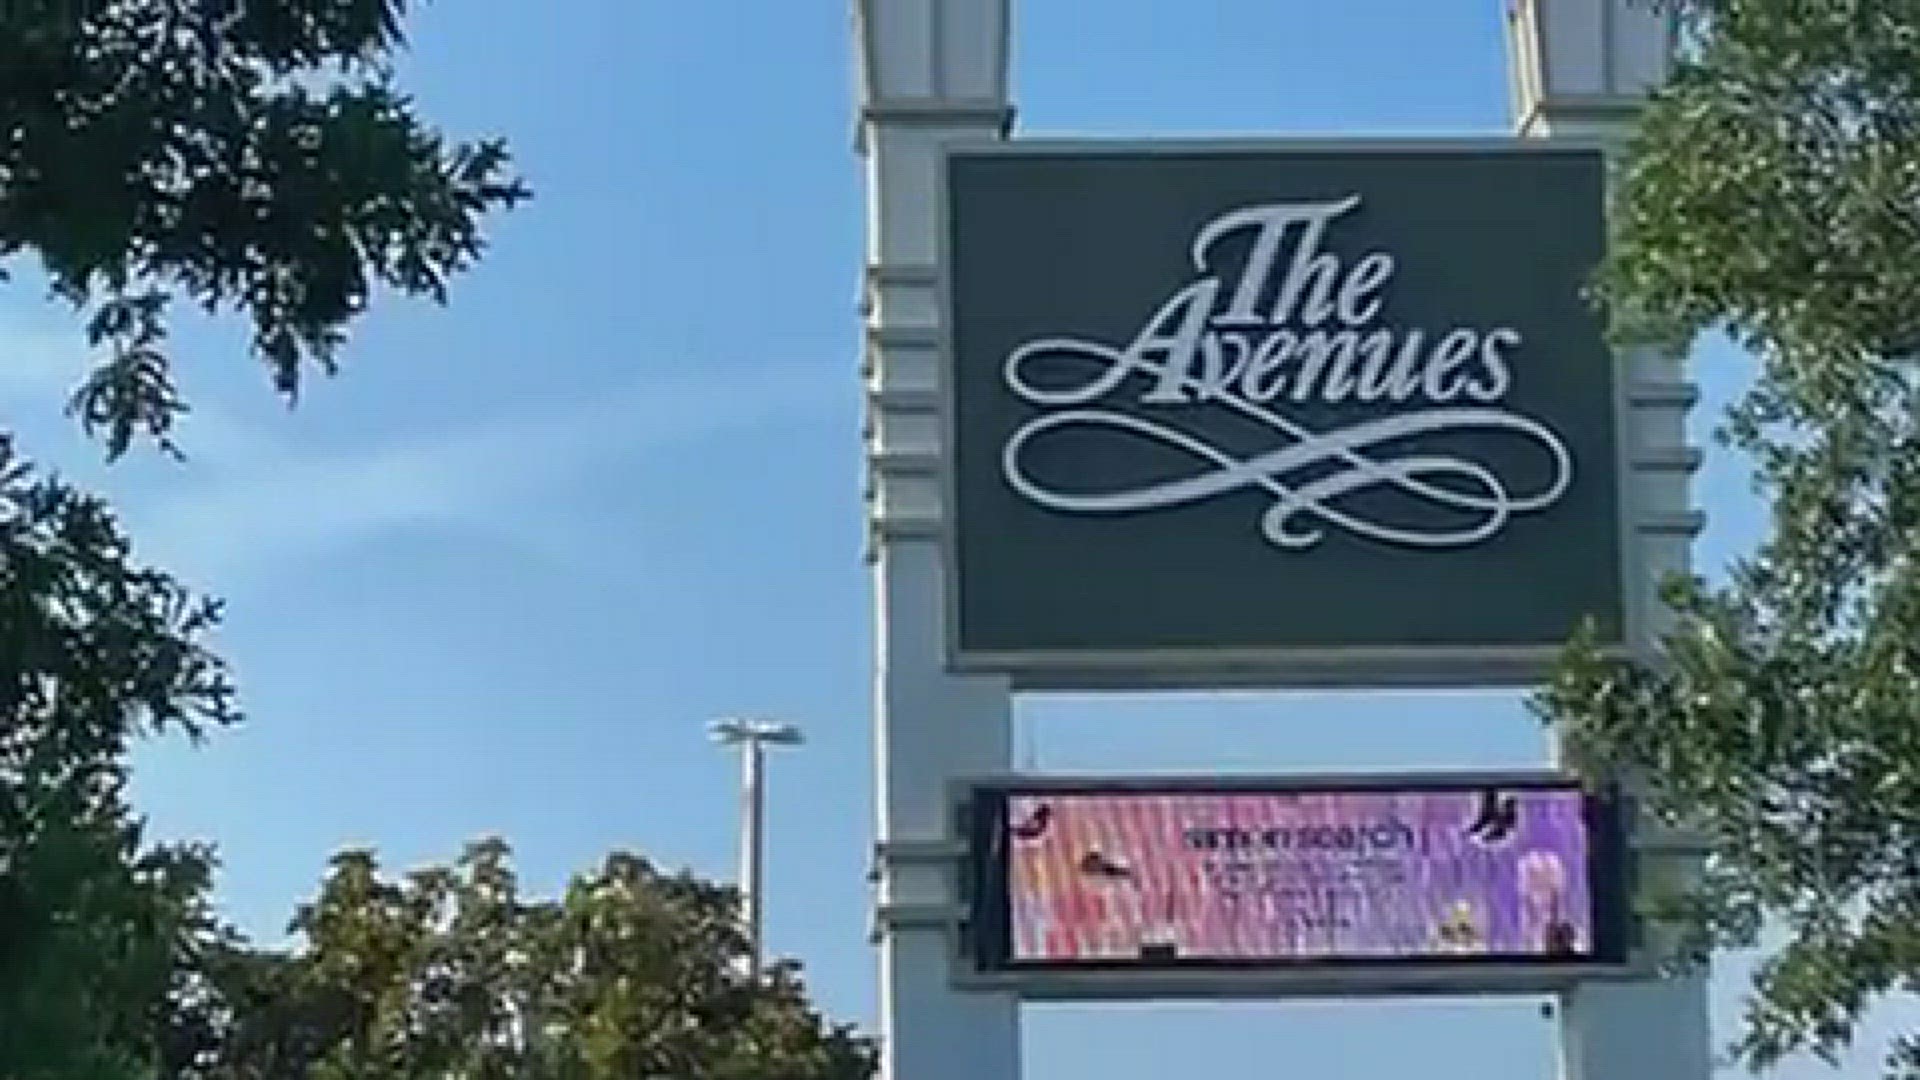 Jacksonville’s The Avenues, 10300 Southside Blvd., is proof indoors malls can not only survive but thrive.
Credit: Harold Goodridge